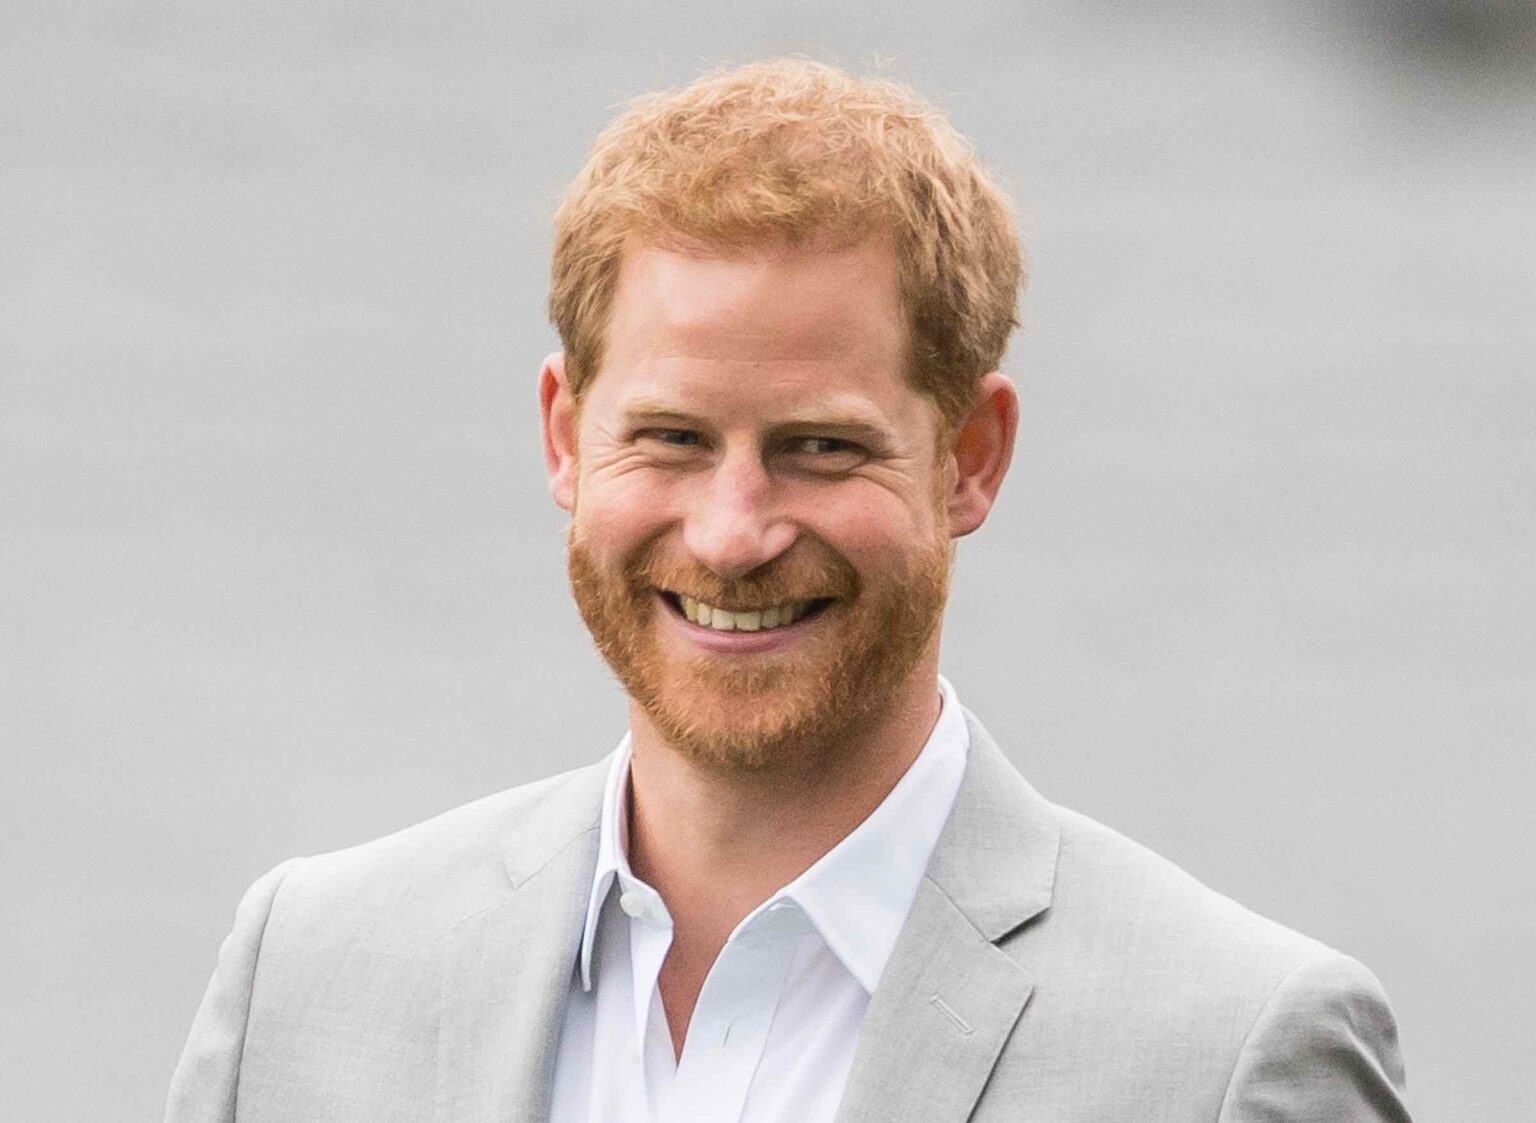 Prince Harry wants to make waves in Hollywood. Will Meghan Markle be making a comeback? Here’s what Harry has reportedly done to build his net worth.